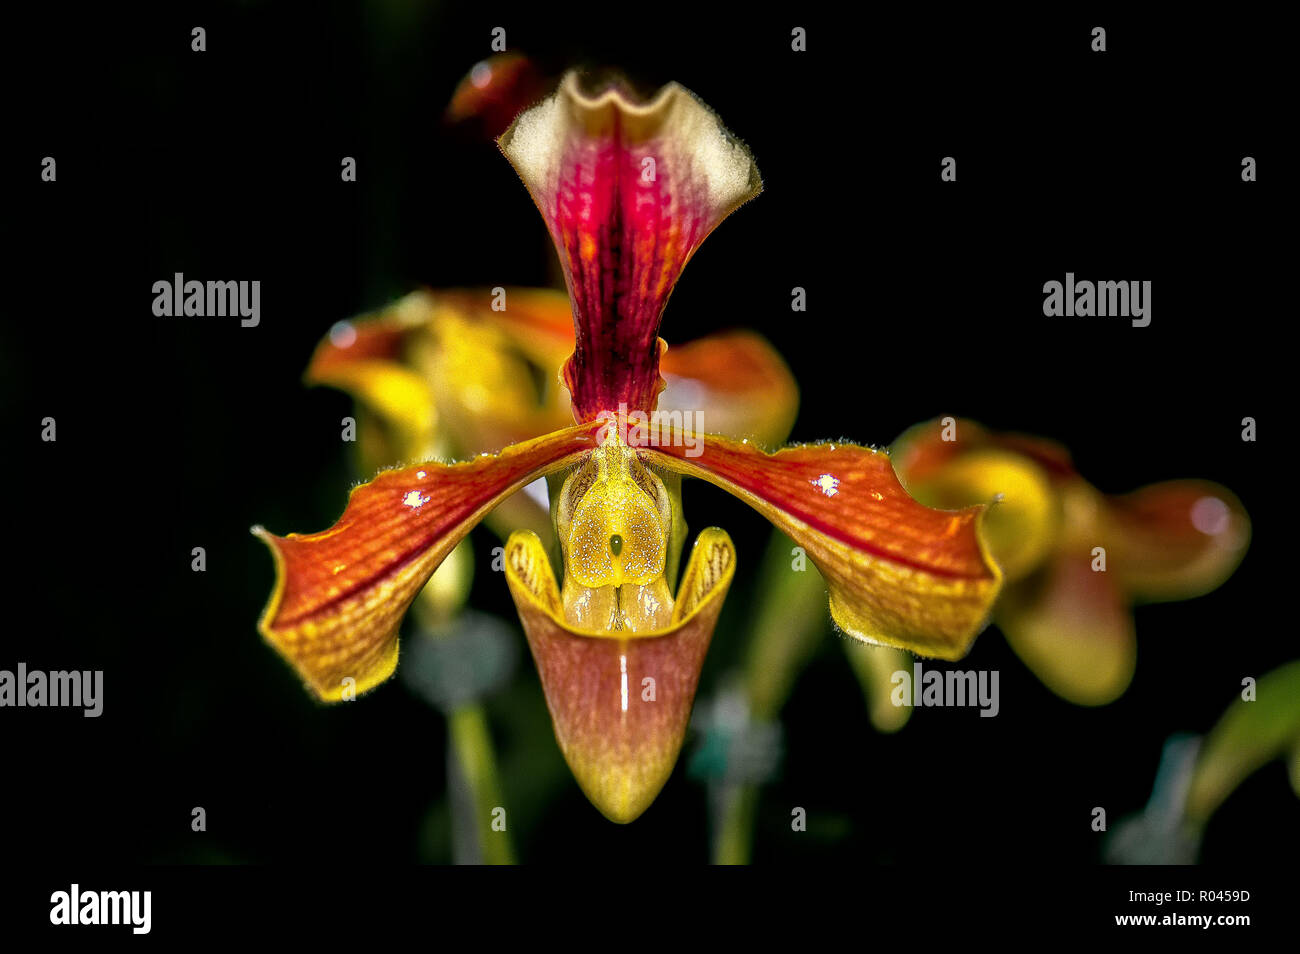 LADY SLIPPER ORCHID. Glossy orange and yellow orchid, known as Lady’s Slipper. Stock Photo